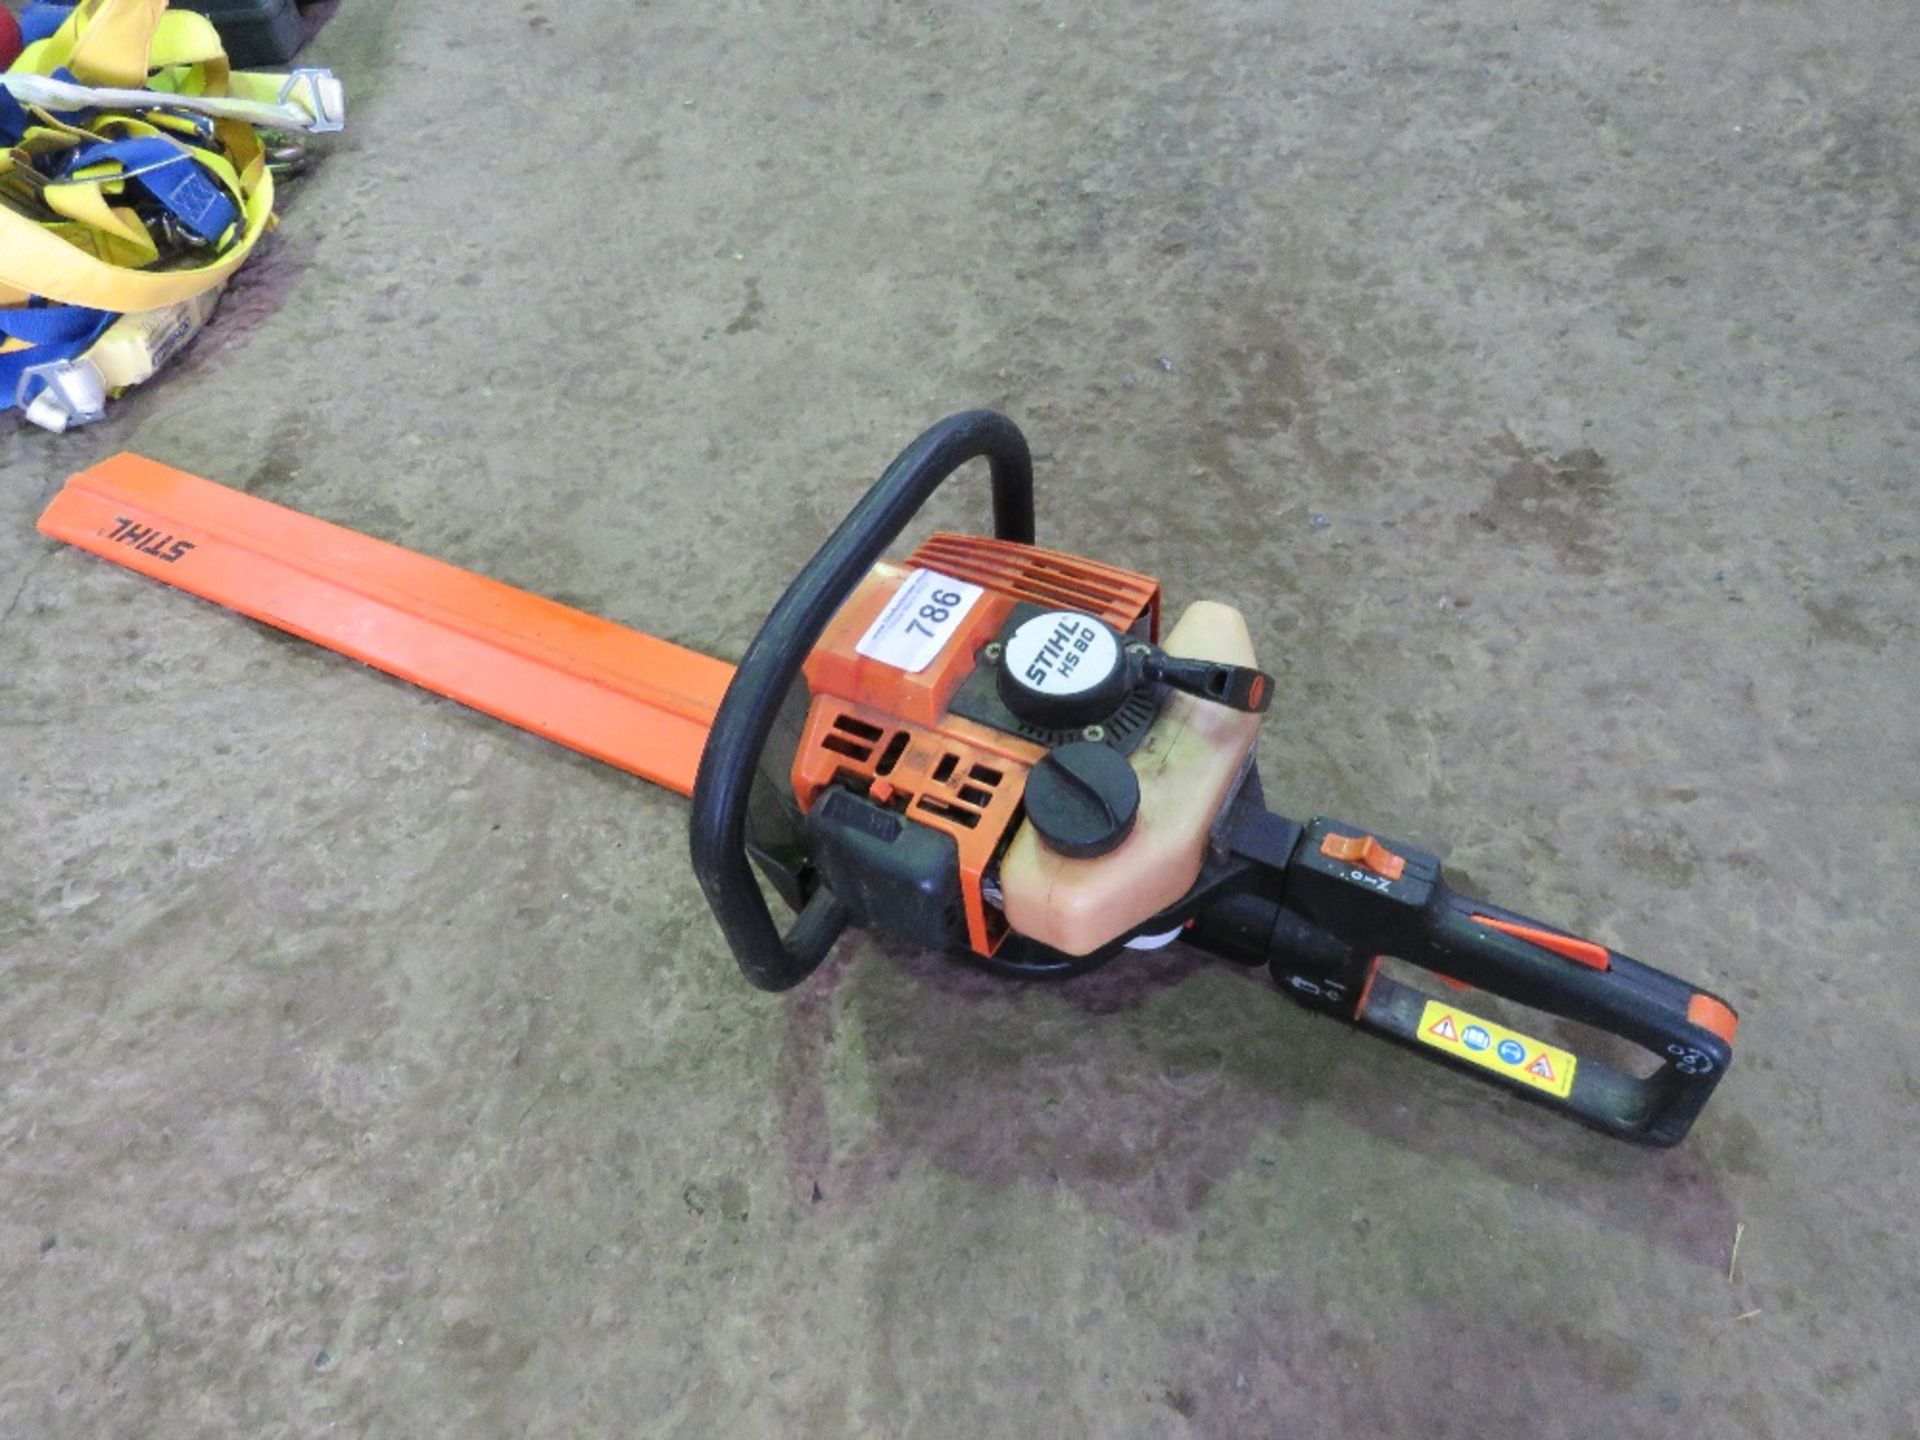 STIHL HS80 PETROL ENGINED HEDGE CUTTER. DIRECT FROM RETIRING BUILDER. THIS LOT IS SOLD UNDE - Image 4 of 4